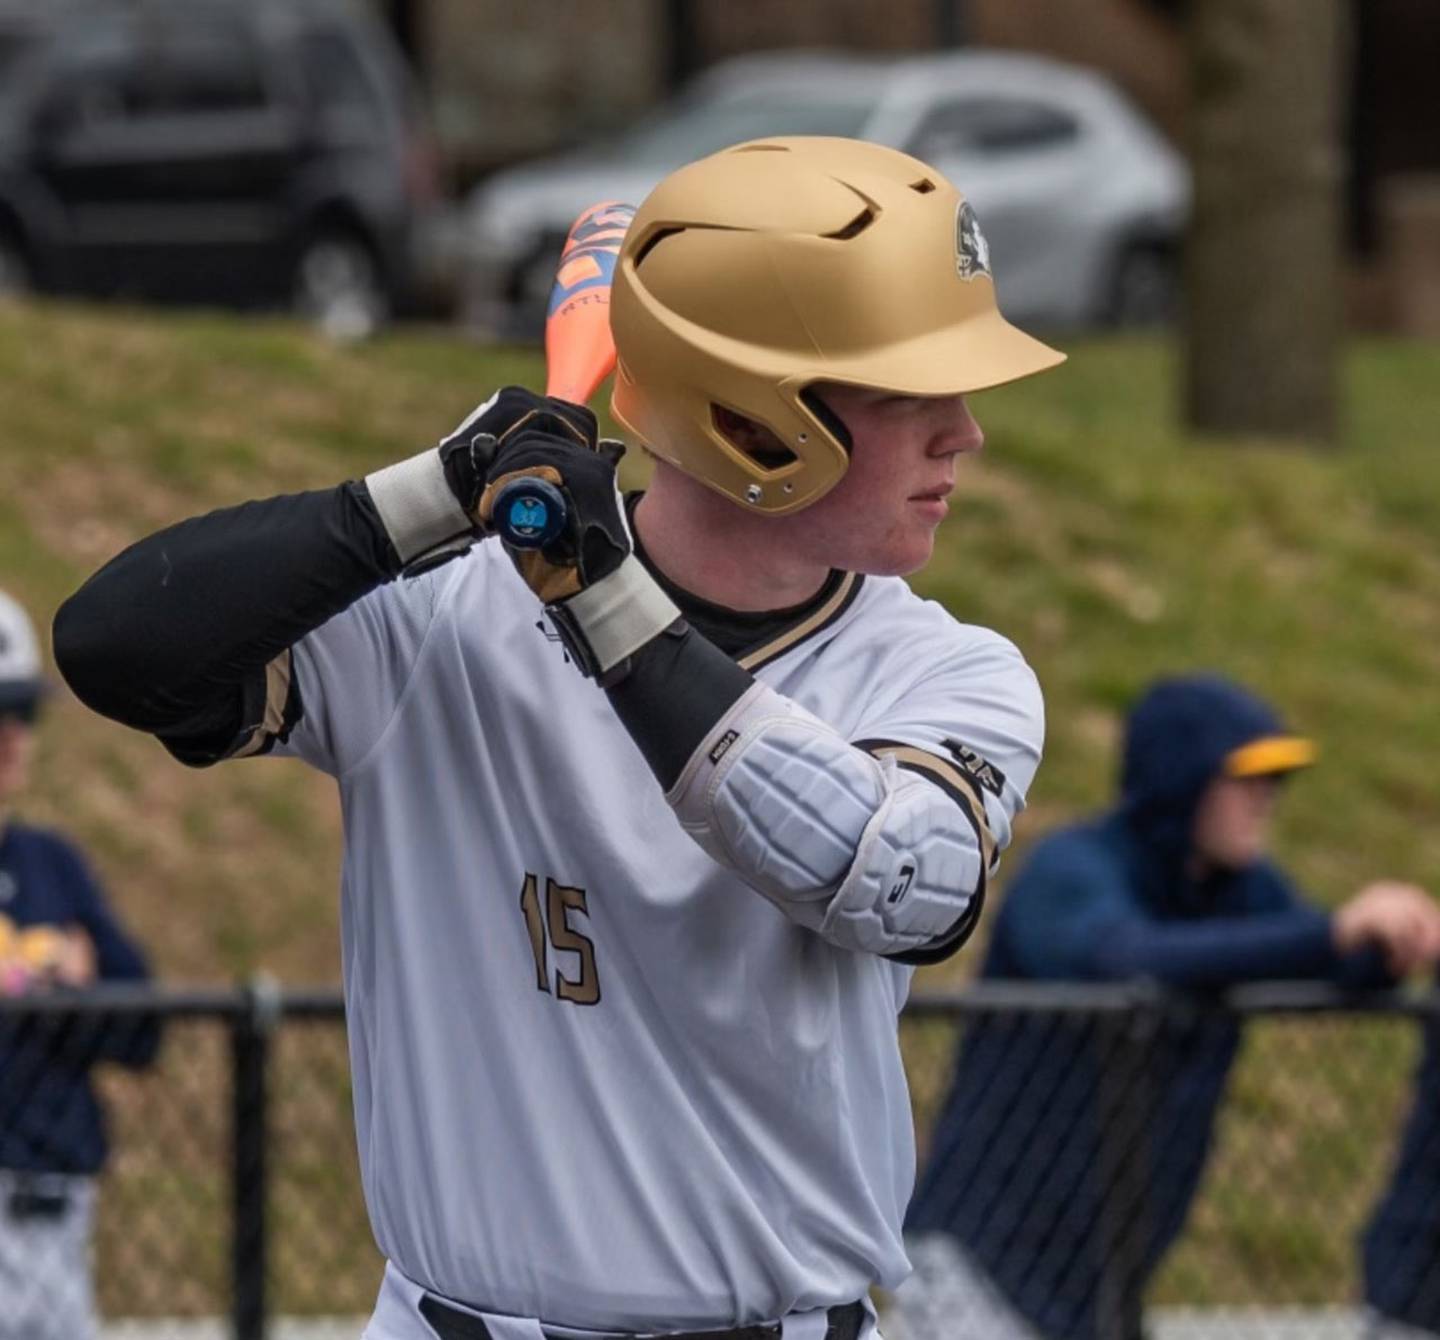 Added muscle and confidence has helped Cameron Leach emerge as the starting catcher on a veteran John Carroll baseball team as a sophomore.